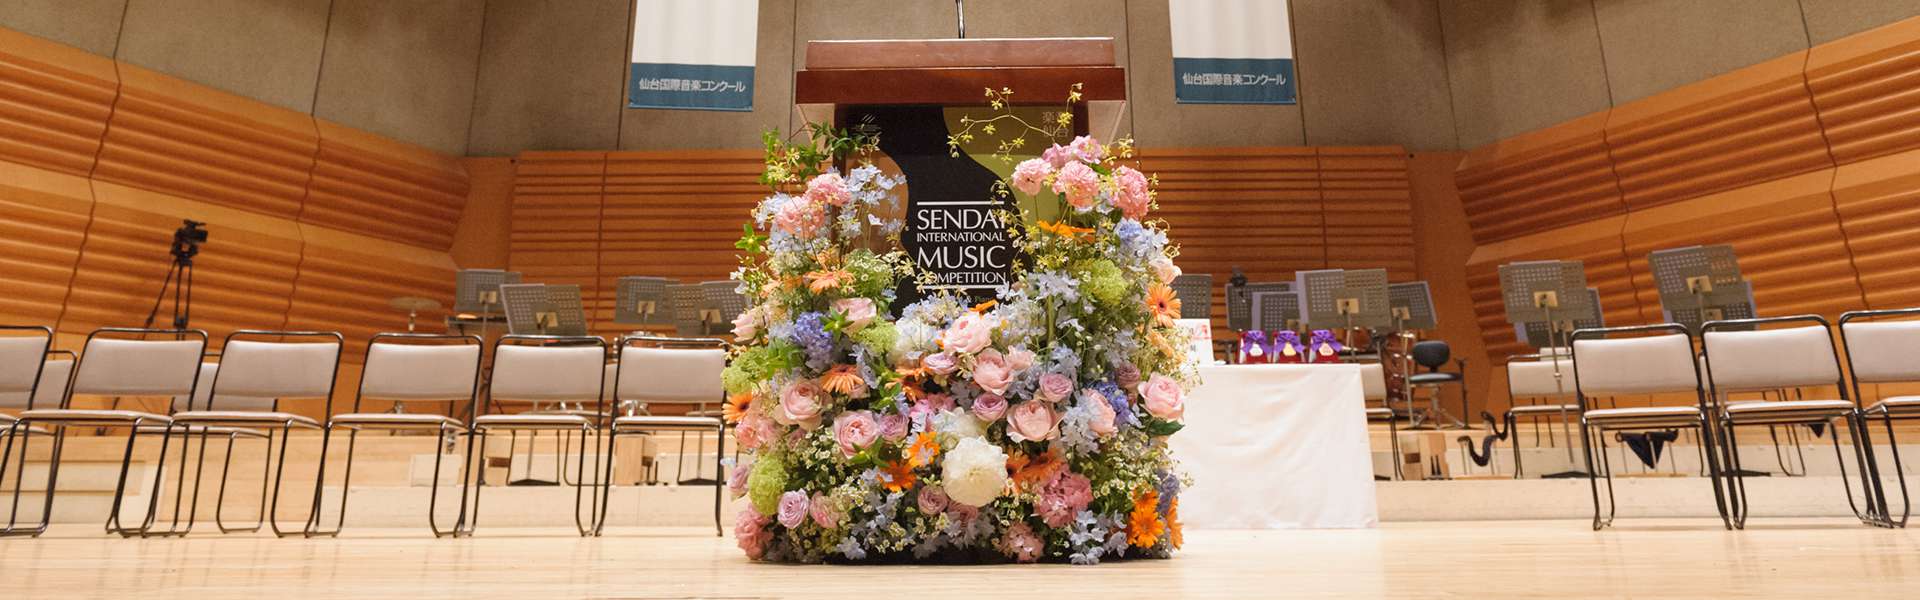 The Evaluation of 6th SIMC Contestants Now Available | Sendai International Music Competition Official Website